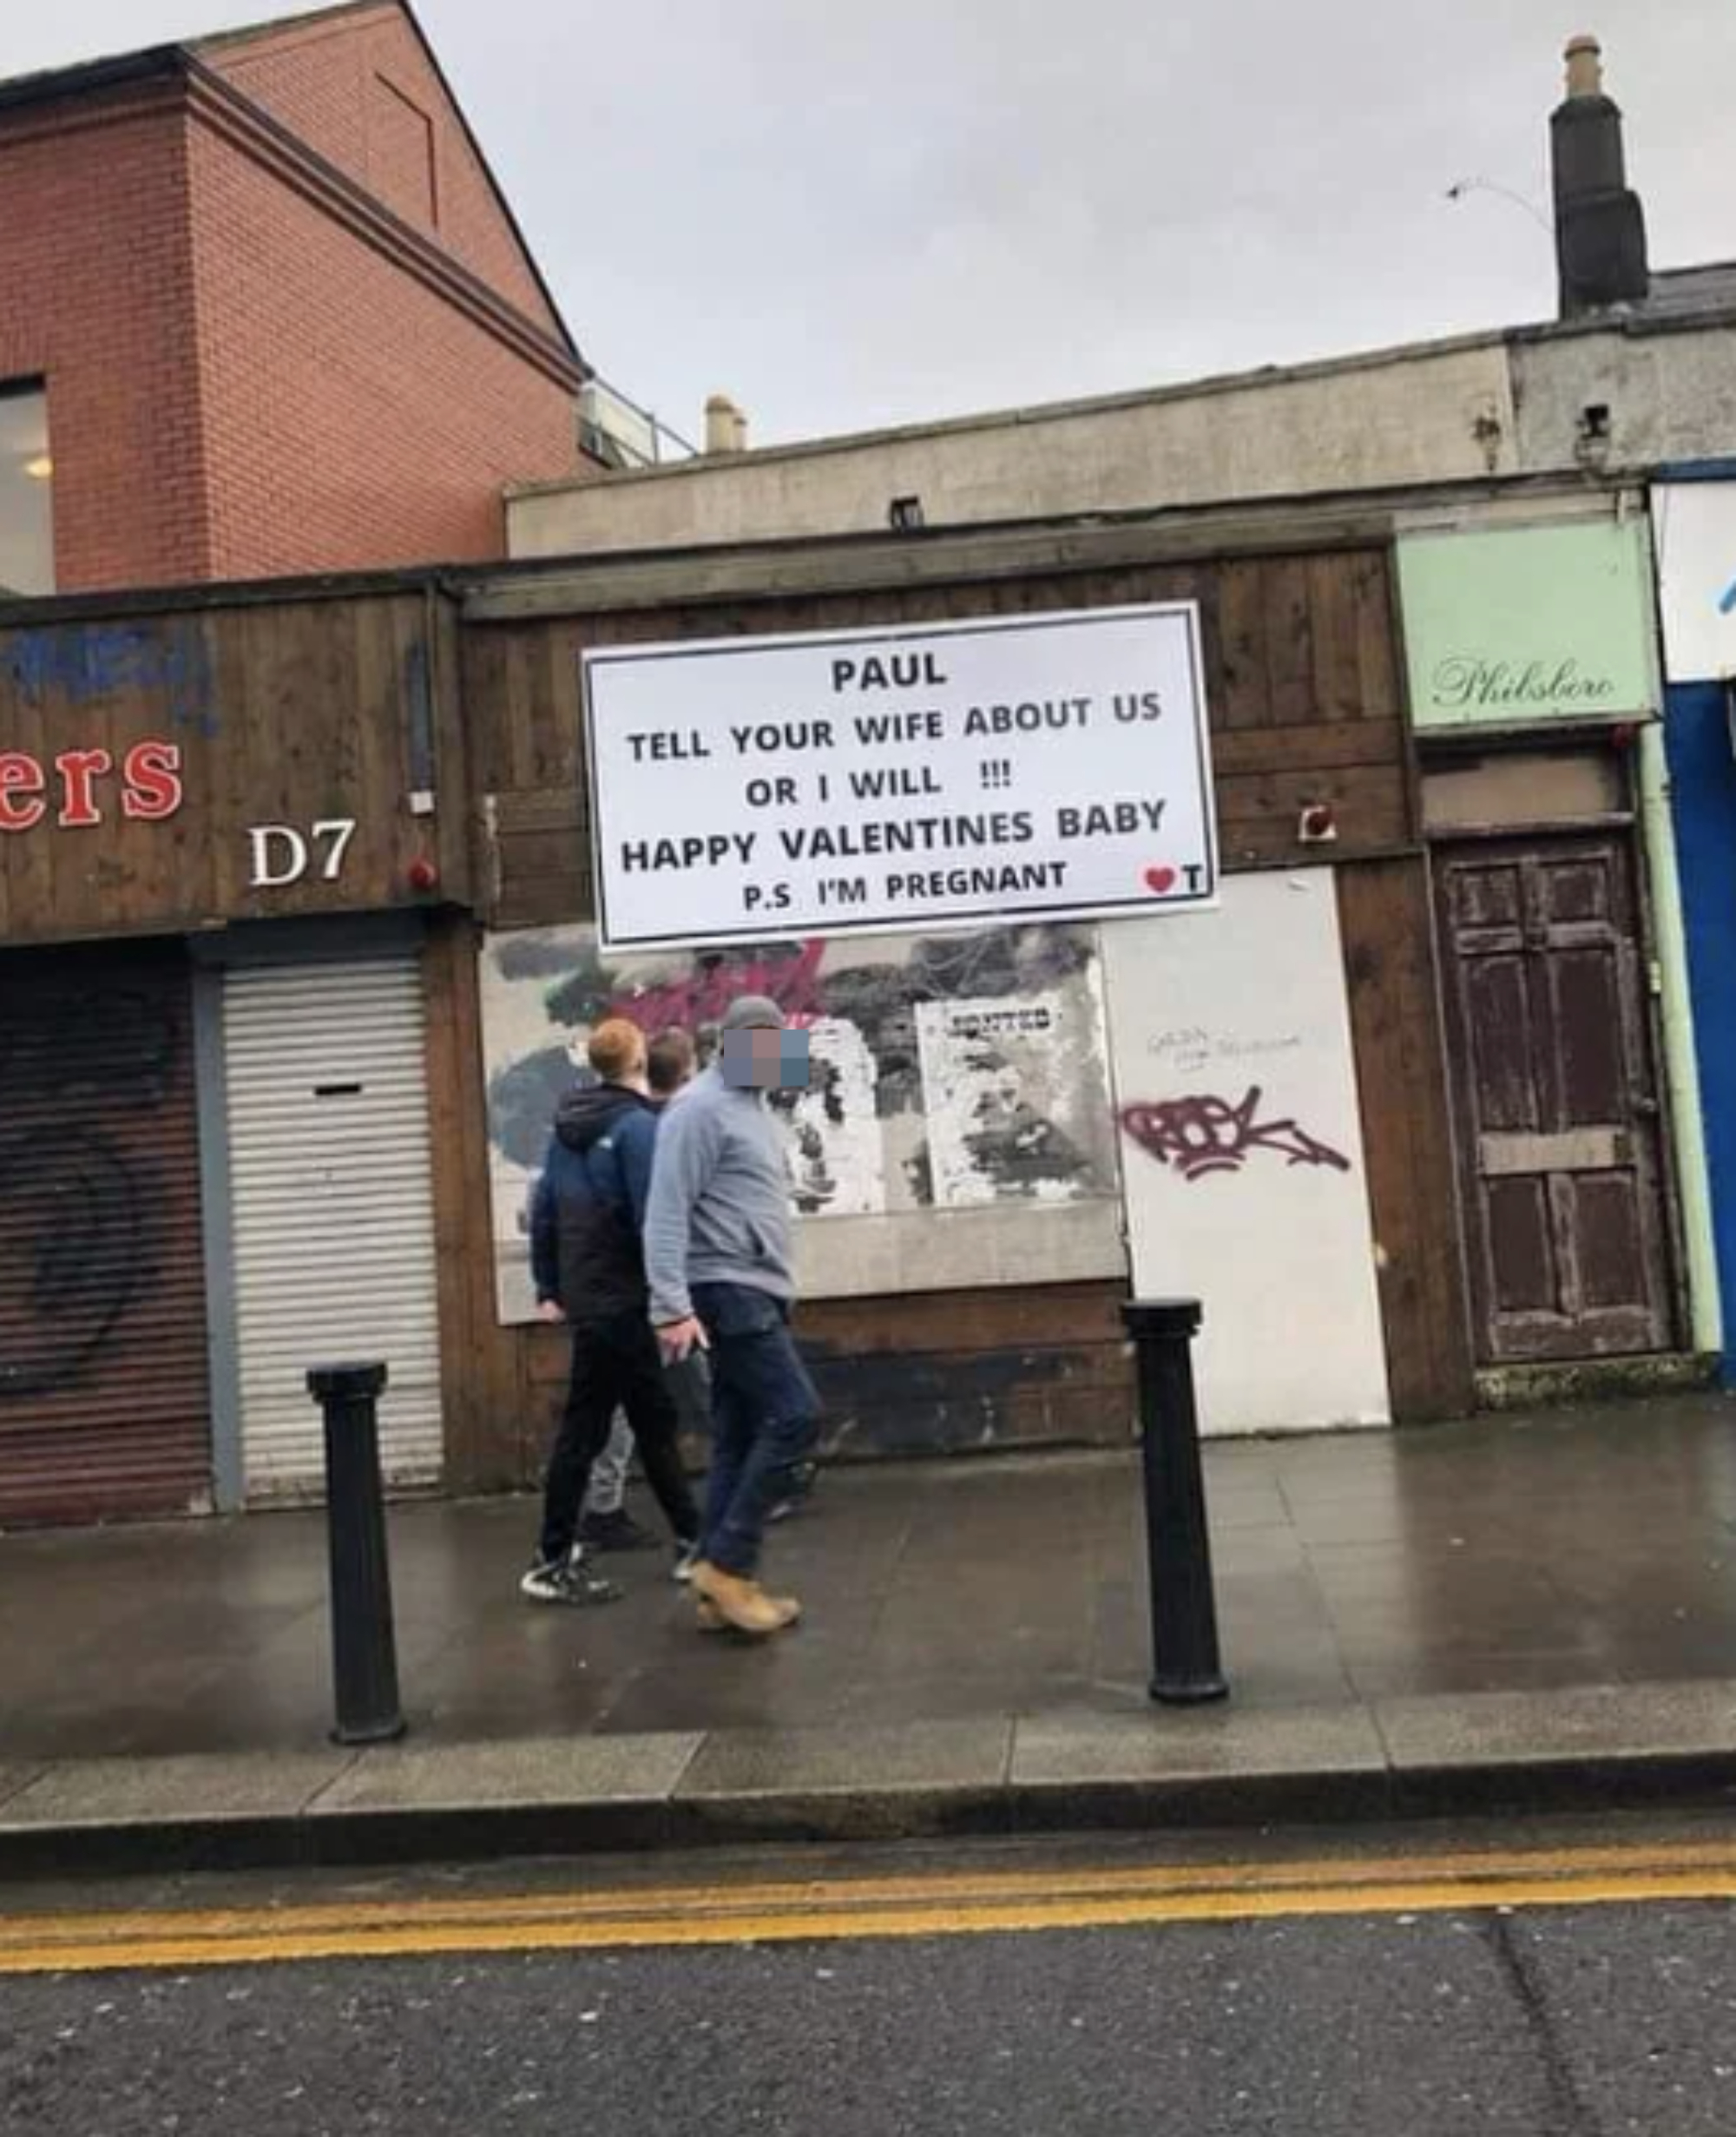 Billboard with a message to Paul about telling his wife of a pregnancy revelation, with two people walking by